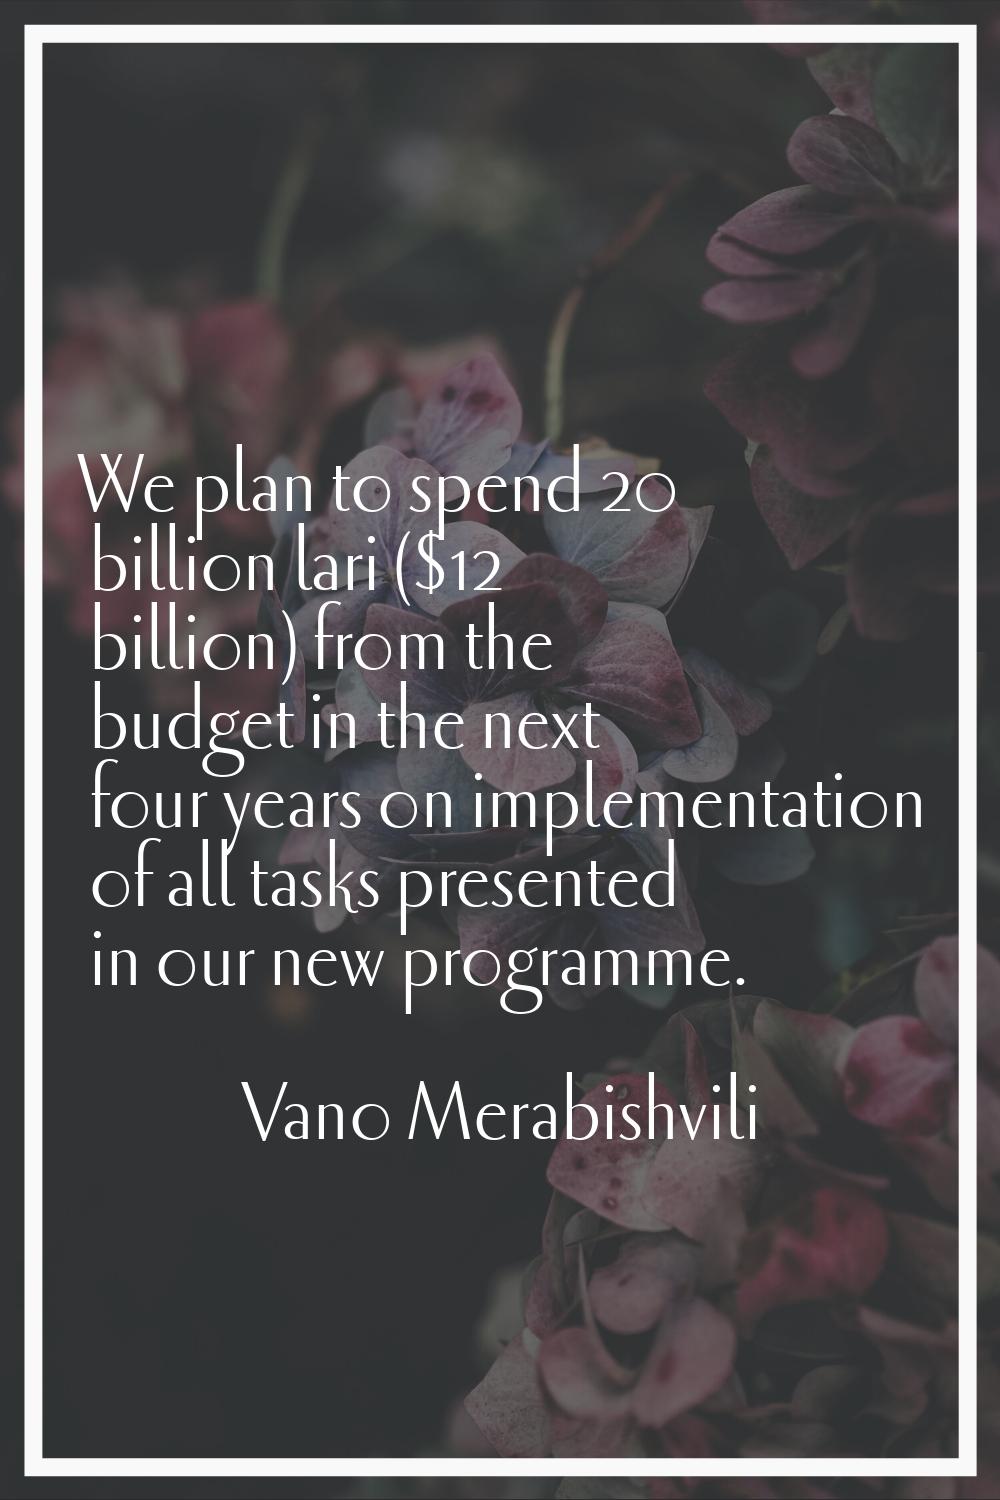 We plan to spend 20 billion lari ($12 billion) from the budget in the next four years on implementa